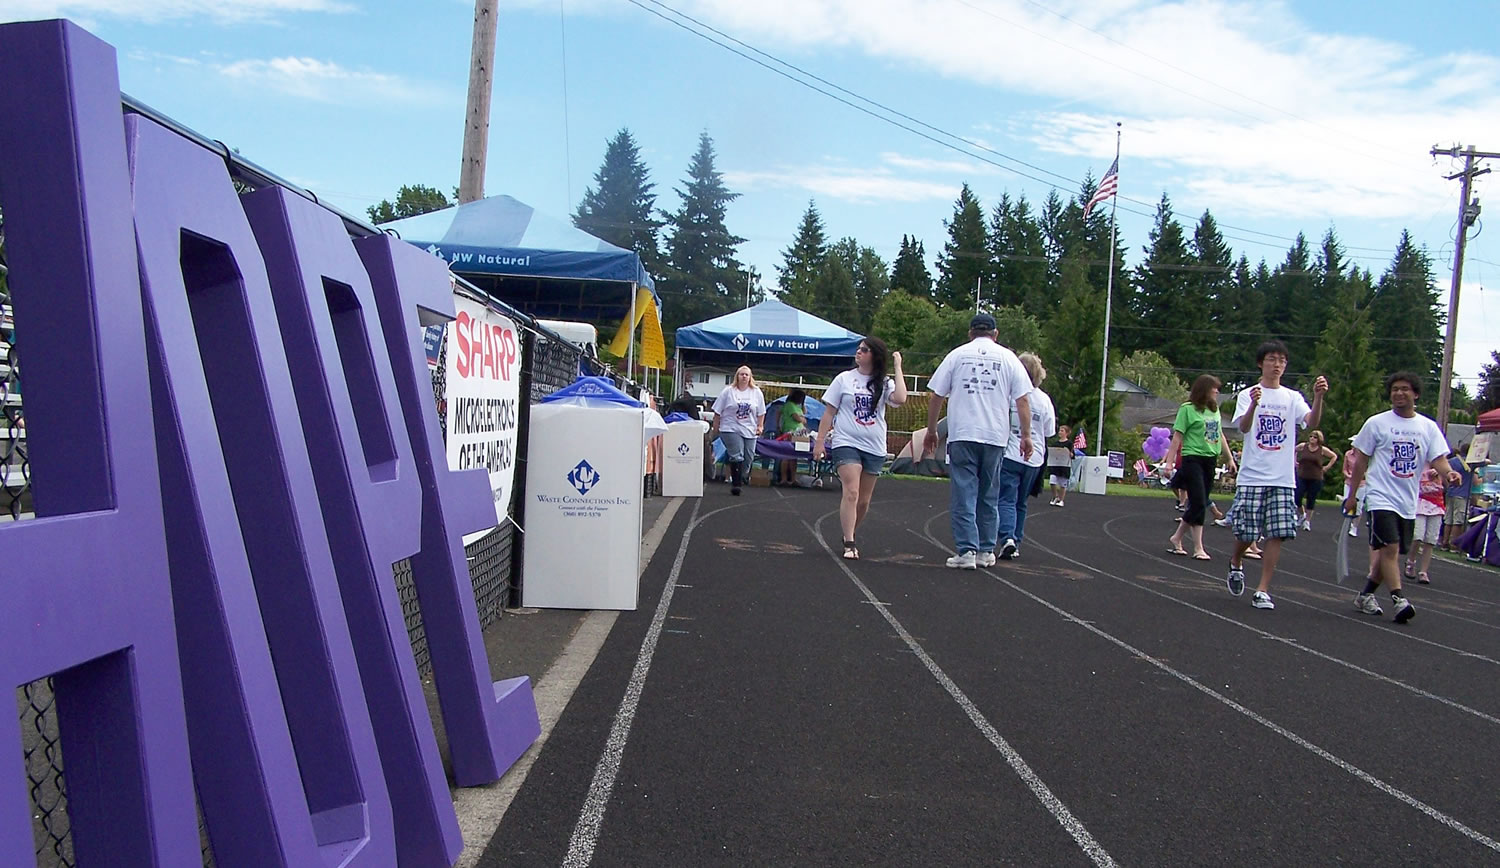 The East Clark County Relay for Life will kick off Saturday, at 10 a.m., at Fishback Stadium in Washougal and run through Sunday at 10 a.m. There are currently 517 relay participants registered.